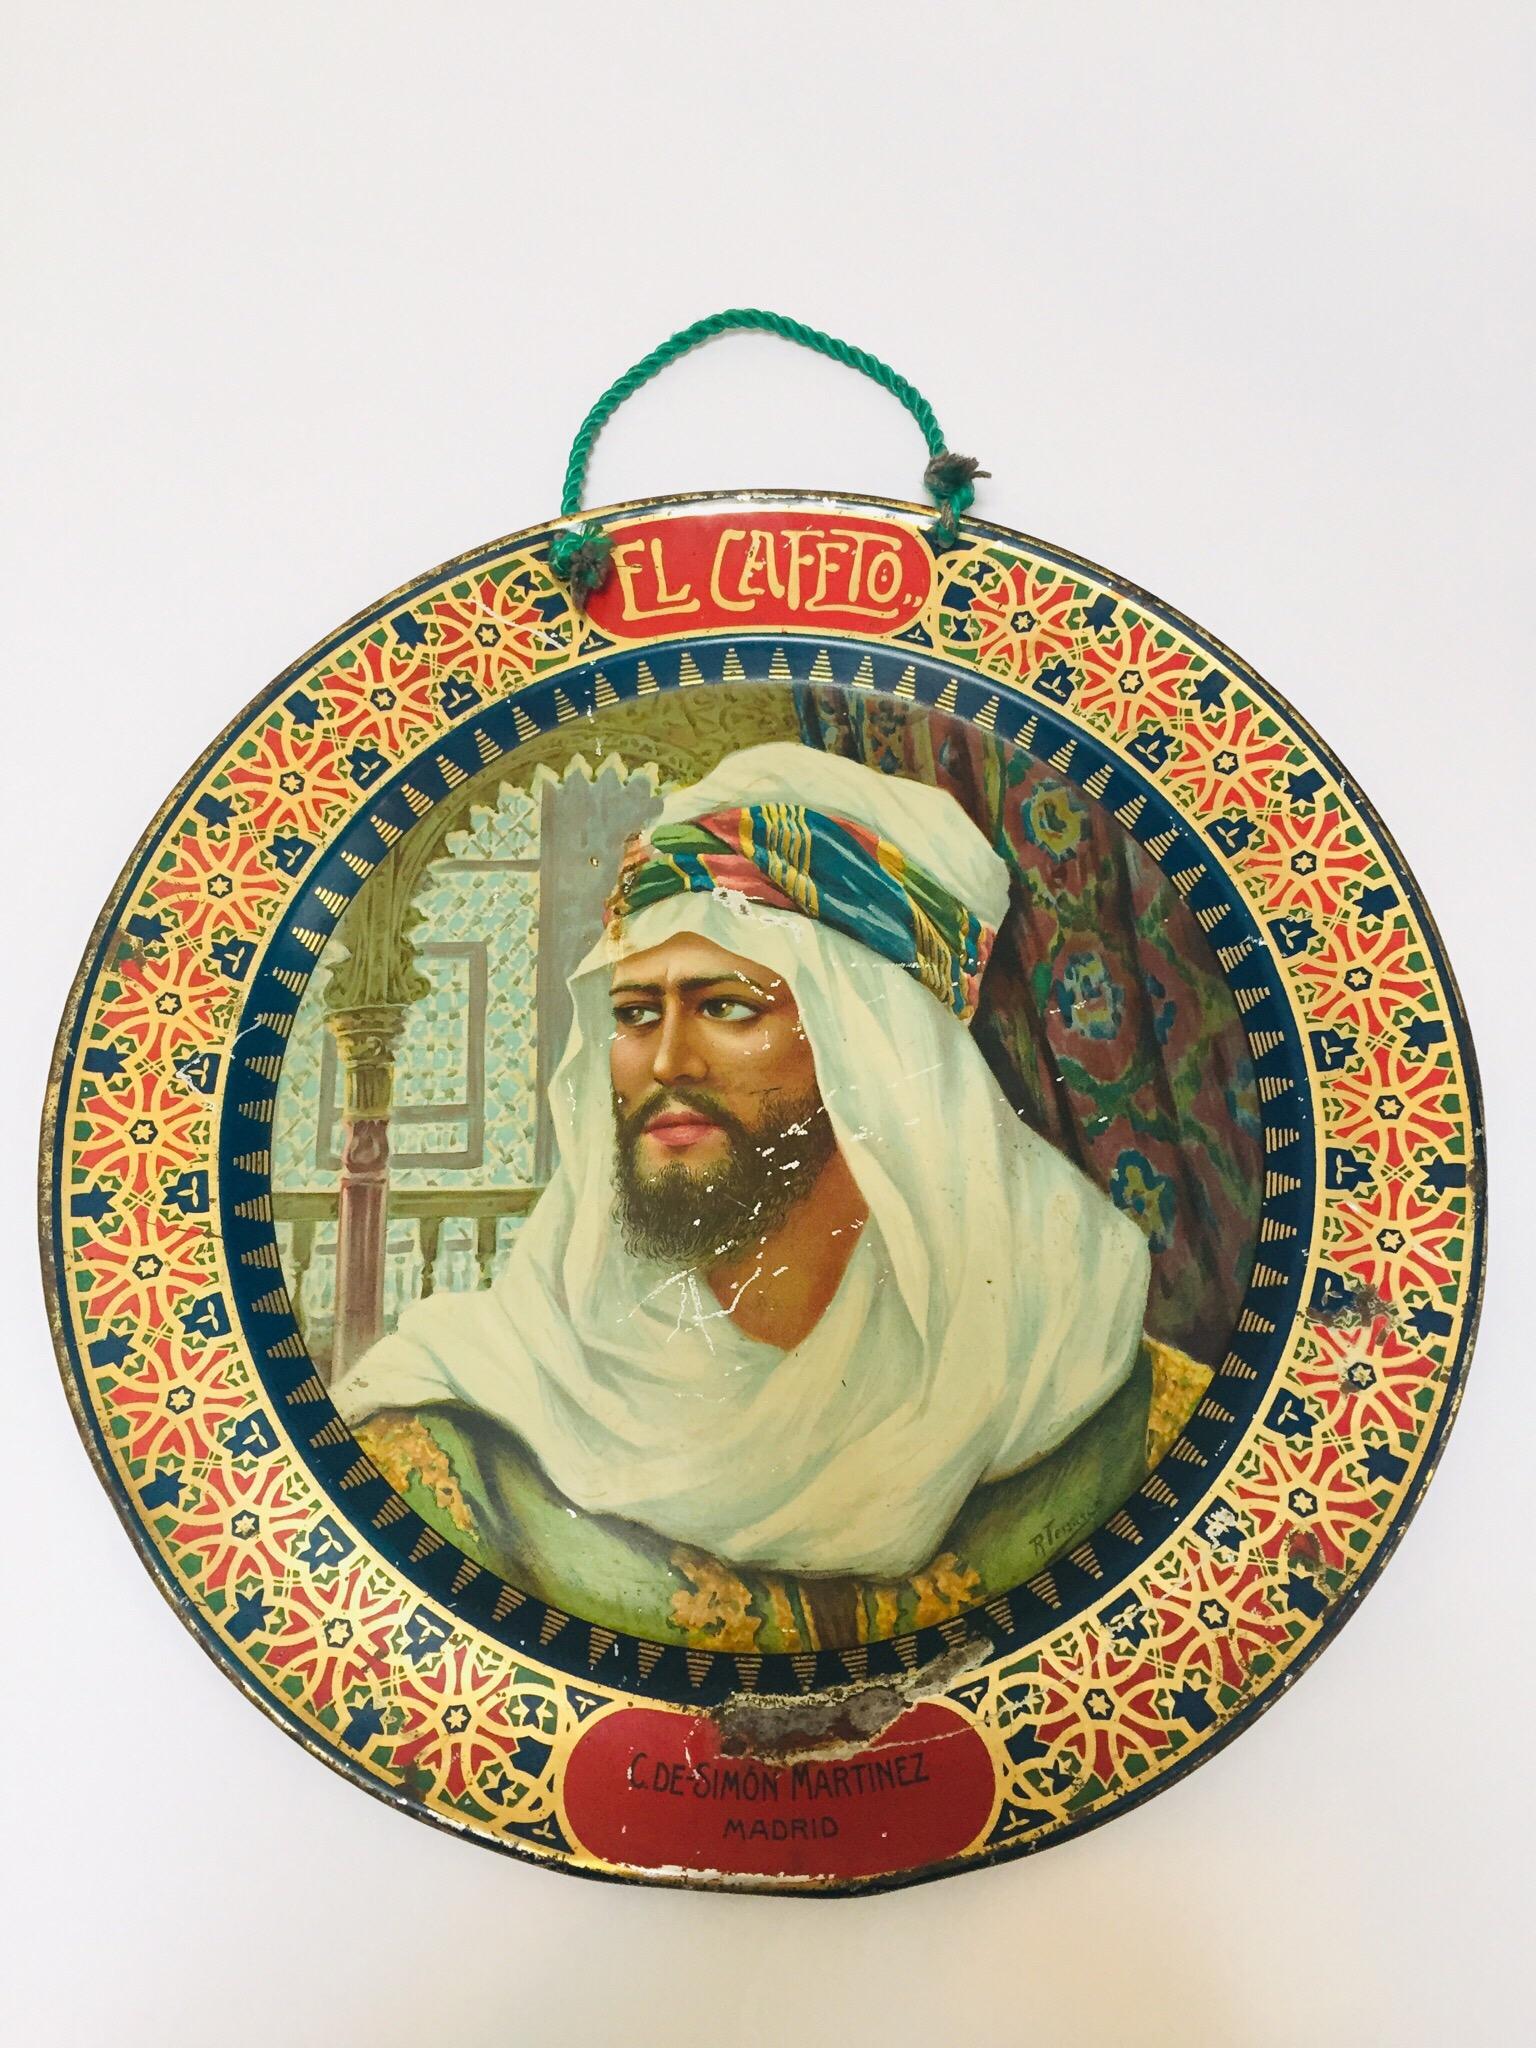 El Cafeto Metal Hanging Advertising Plate with a Moorish Prince 3